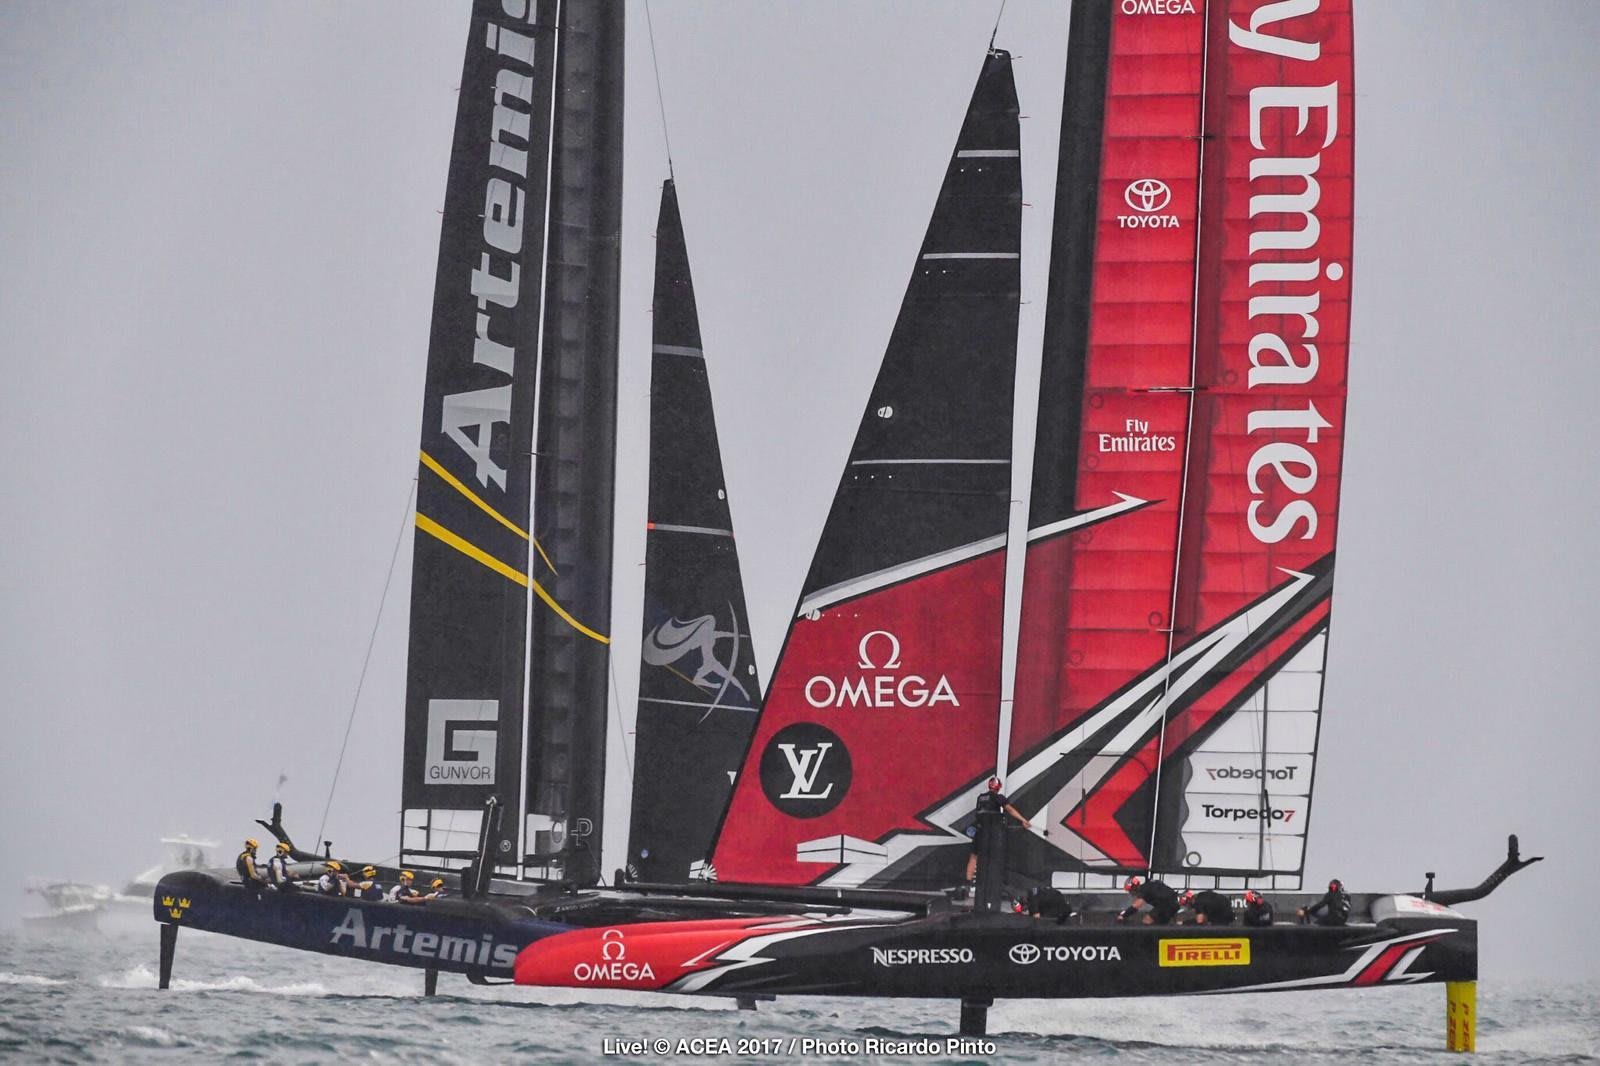 America's Cup floats Louis Vuitton's boat